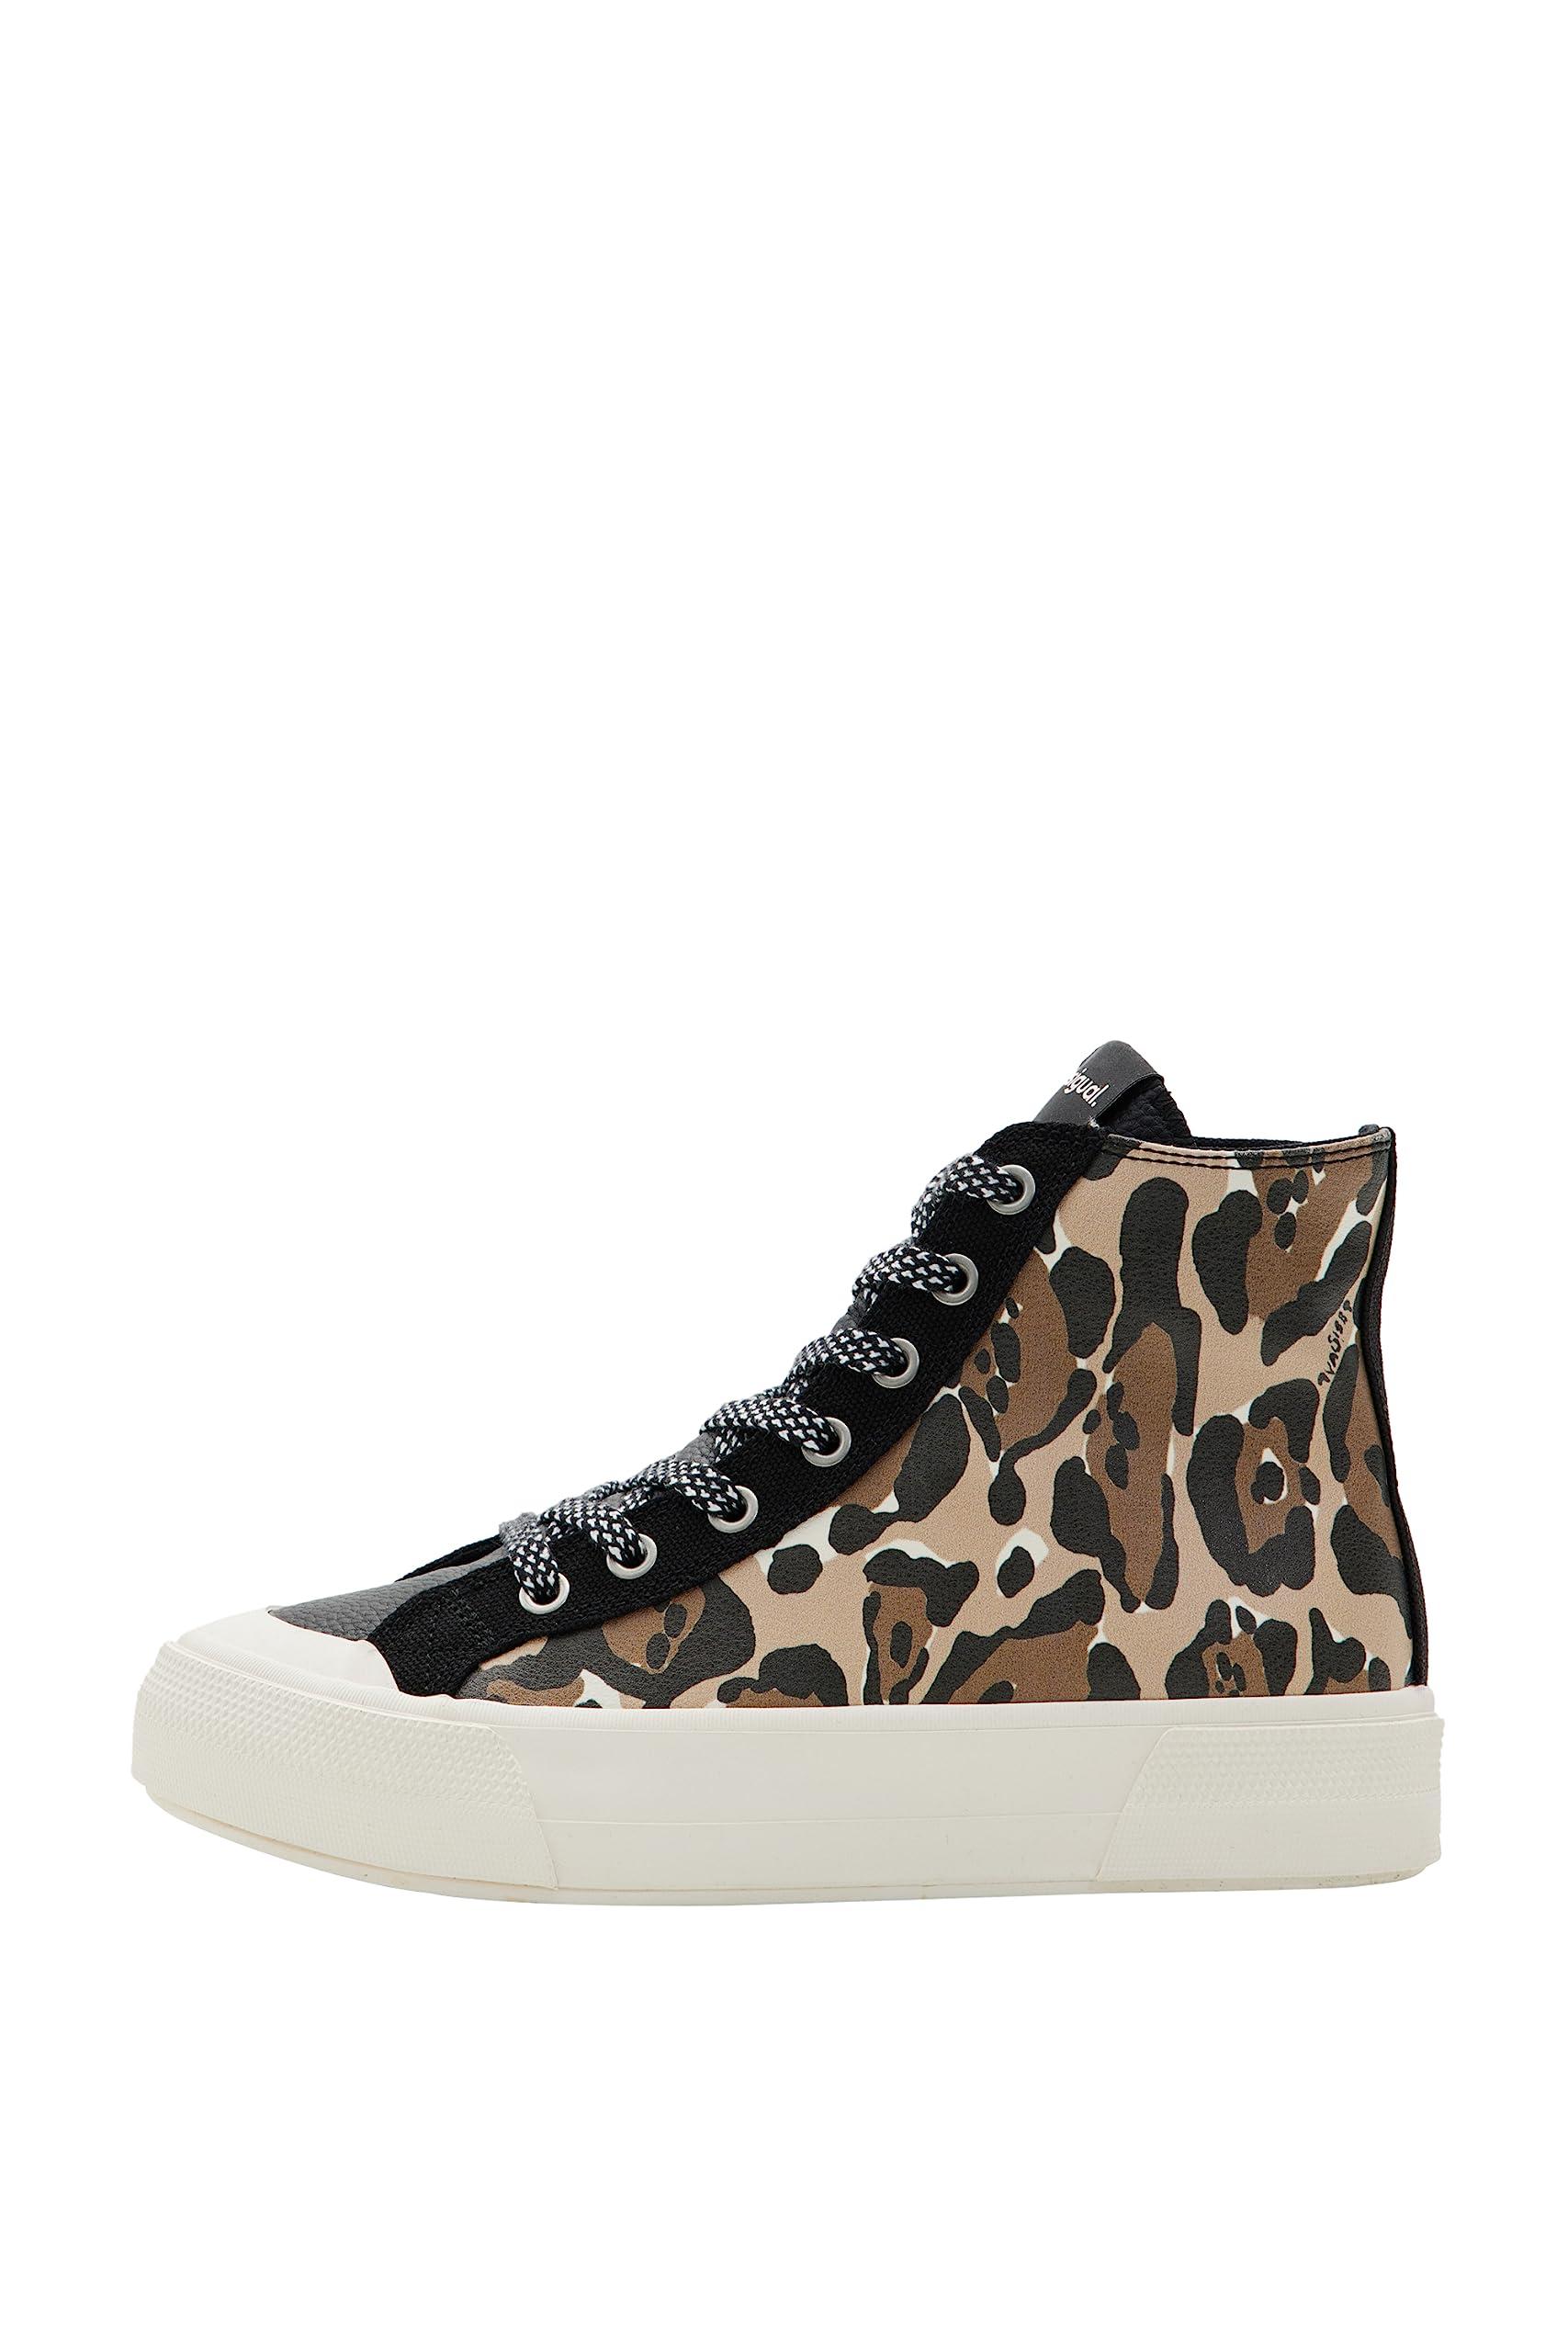 Desigual High-top Animal Print Sneakers in White | Lyst